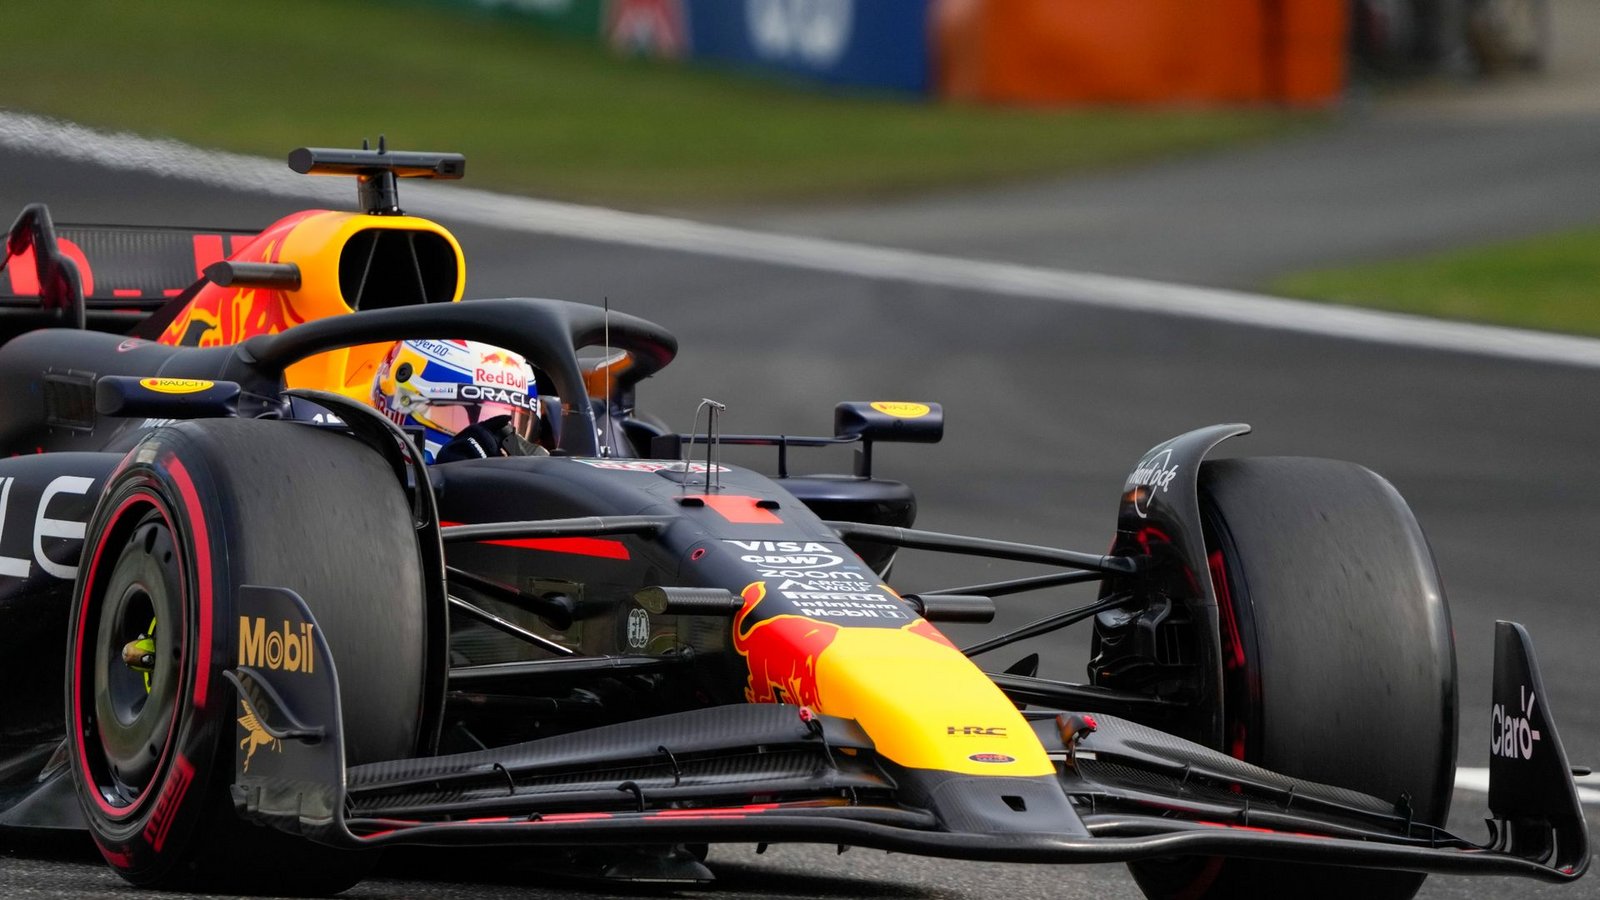 Schnappte sich in China die Pole Position: Max Verstappen.Foto: Andy Wong/AP